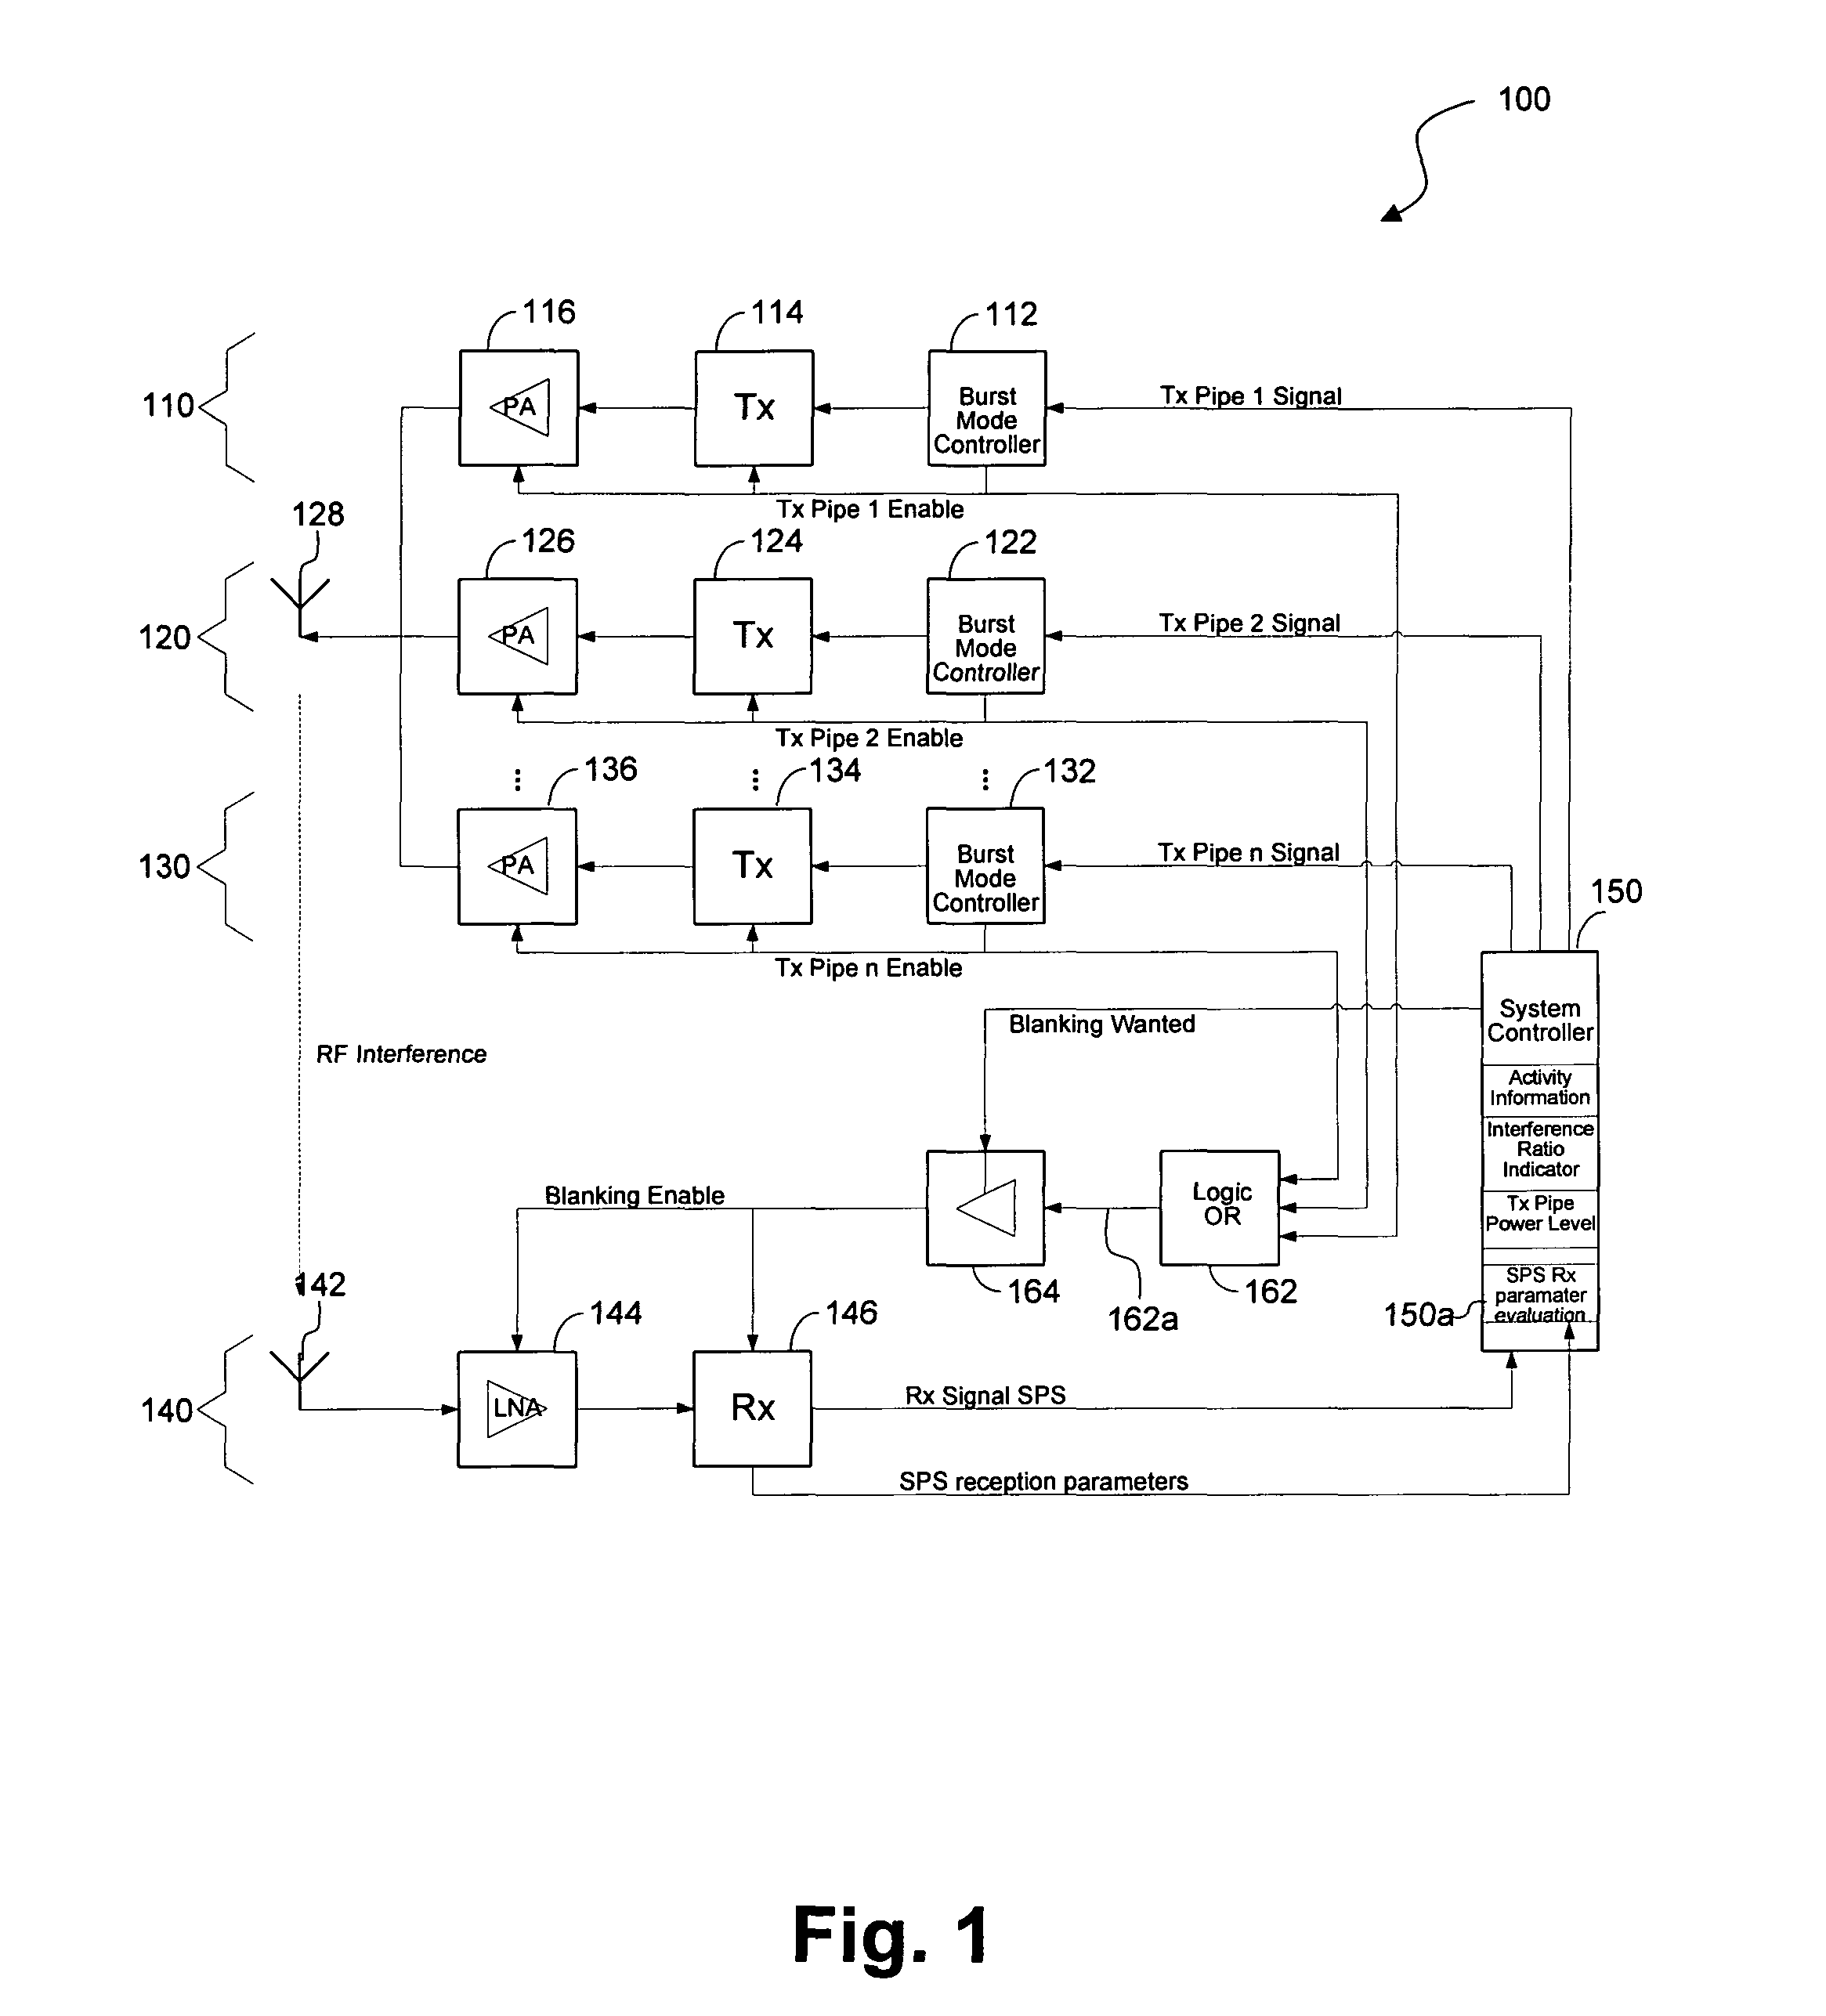 Method Using a Blanking Signal to Reduce the Leakage Transmitter-Receiver